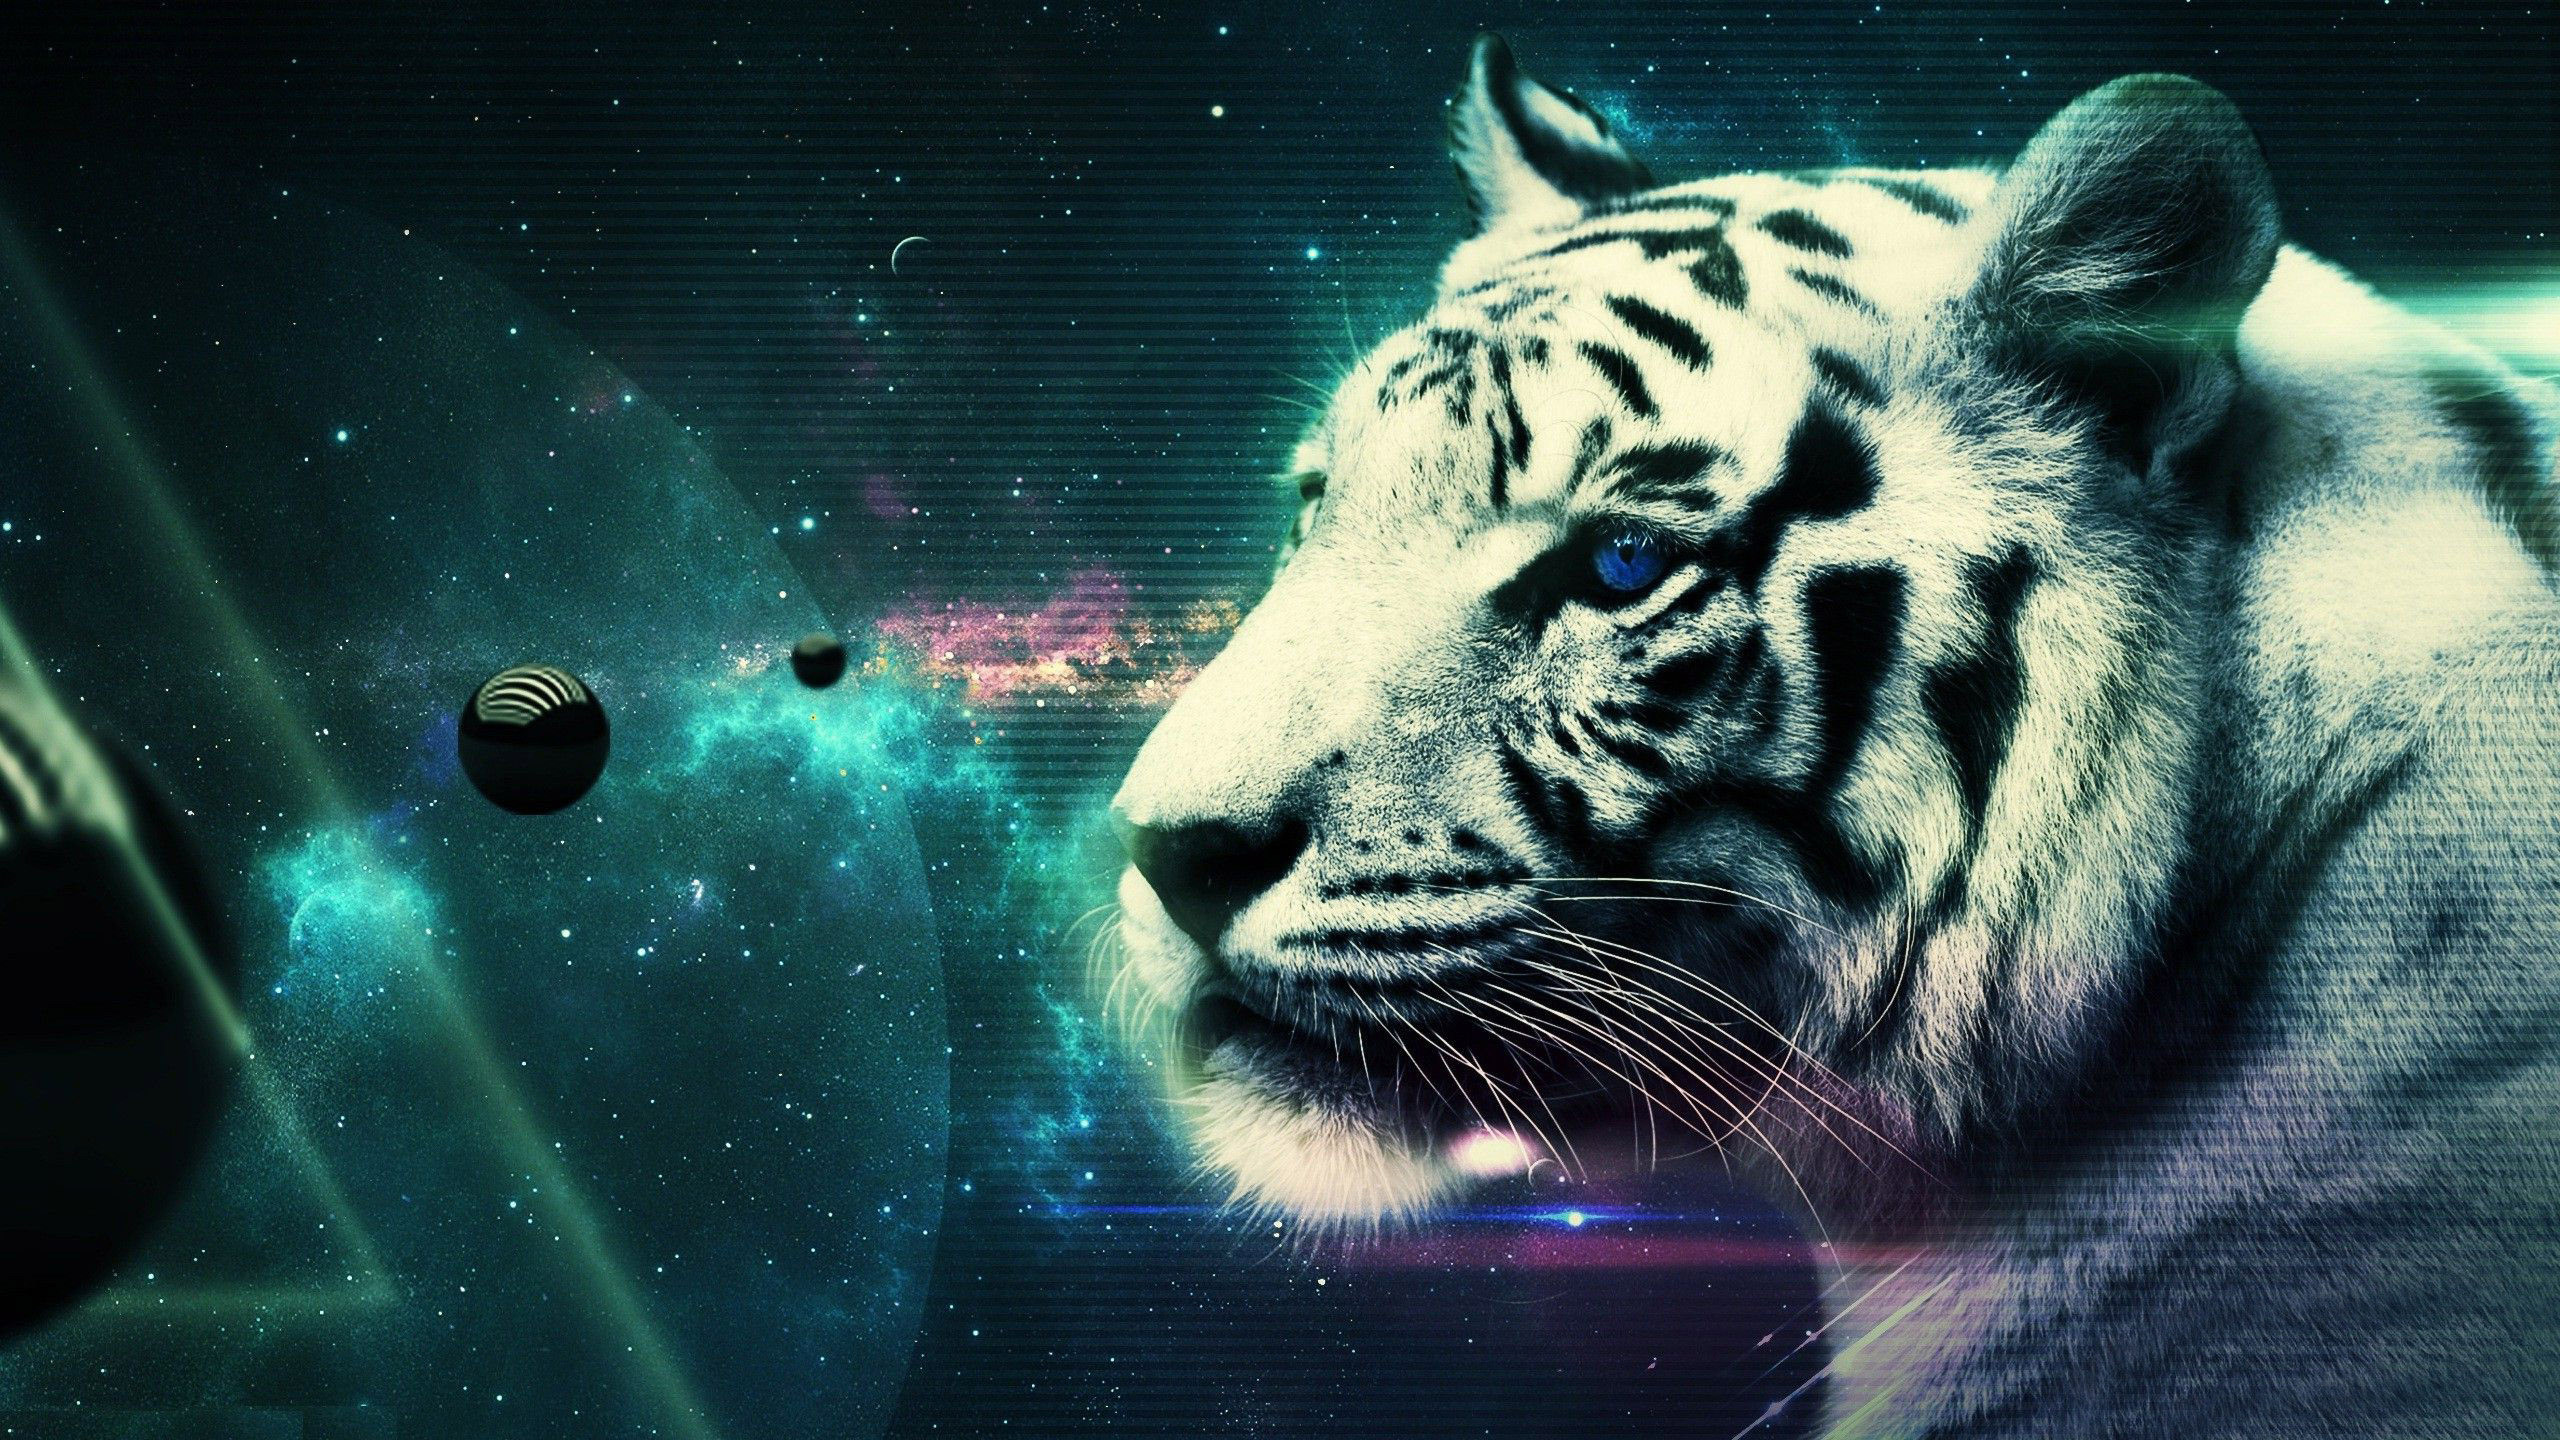 free cool wallpapers of tigers with cool wall papers.